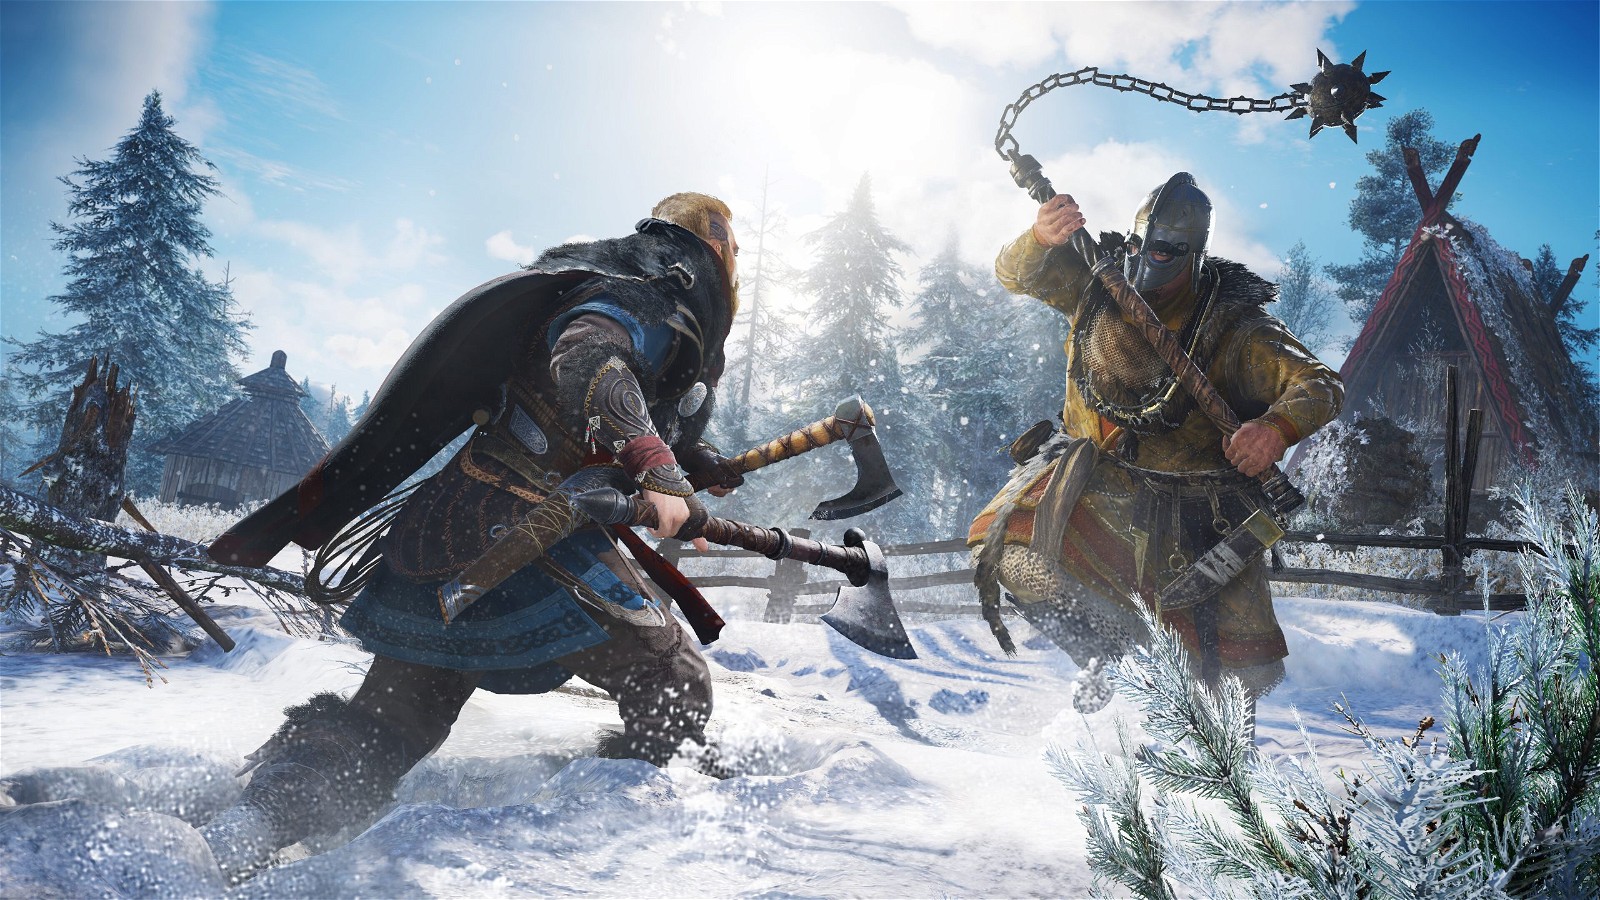 Laferrière says this option is the developers' intended way to play Assassin's Creed Valhalla.